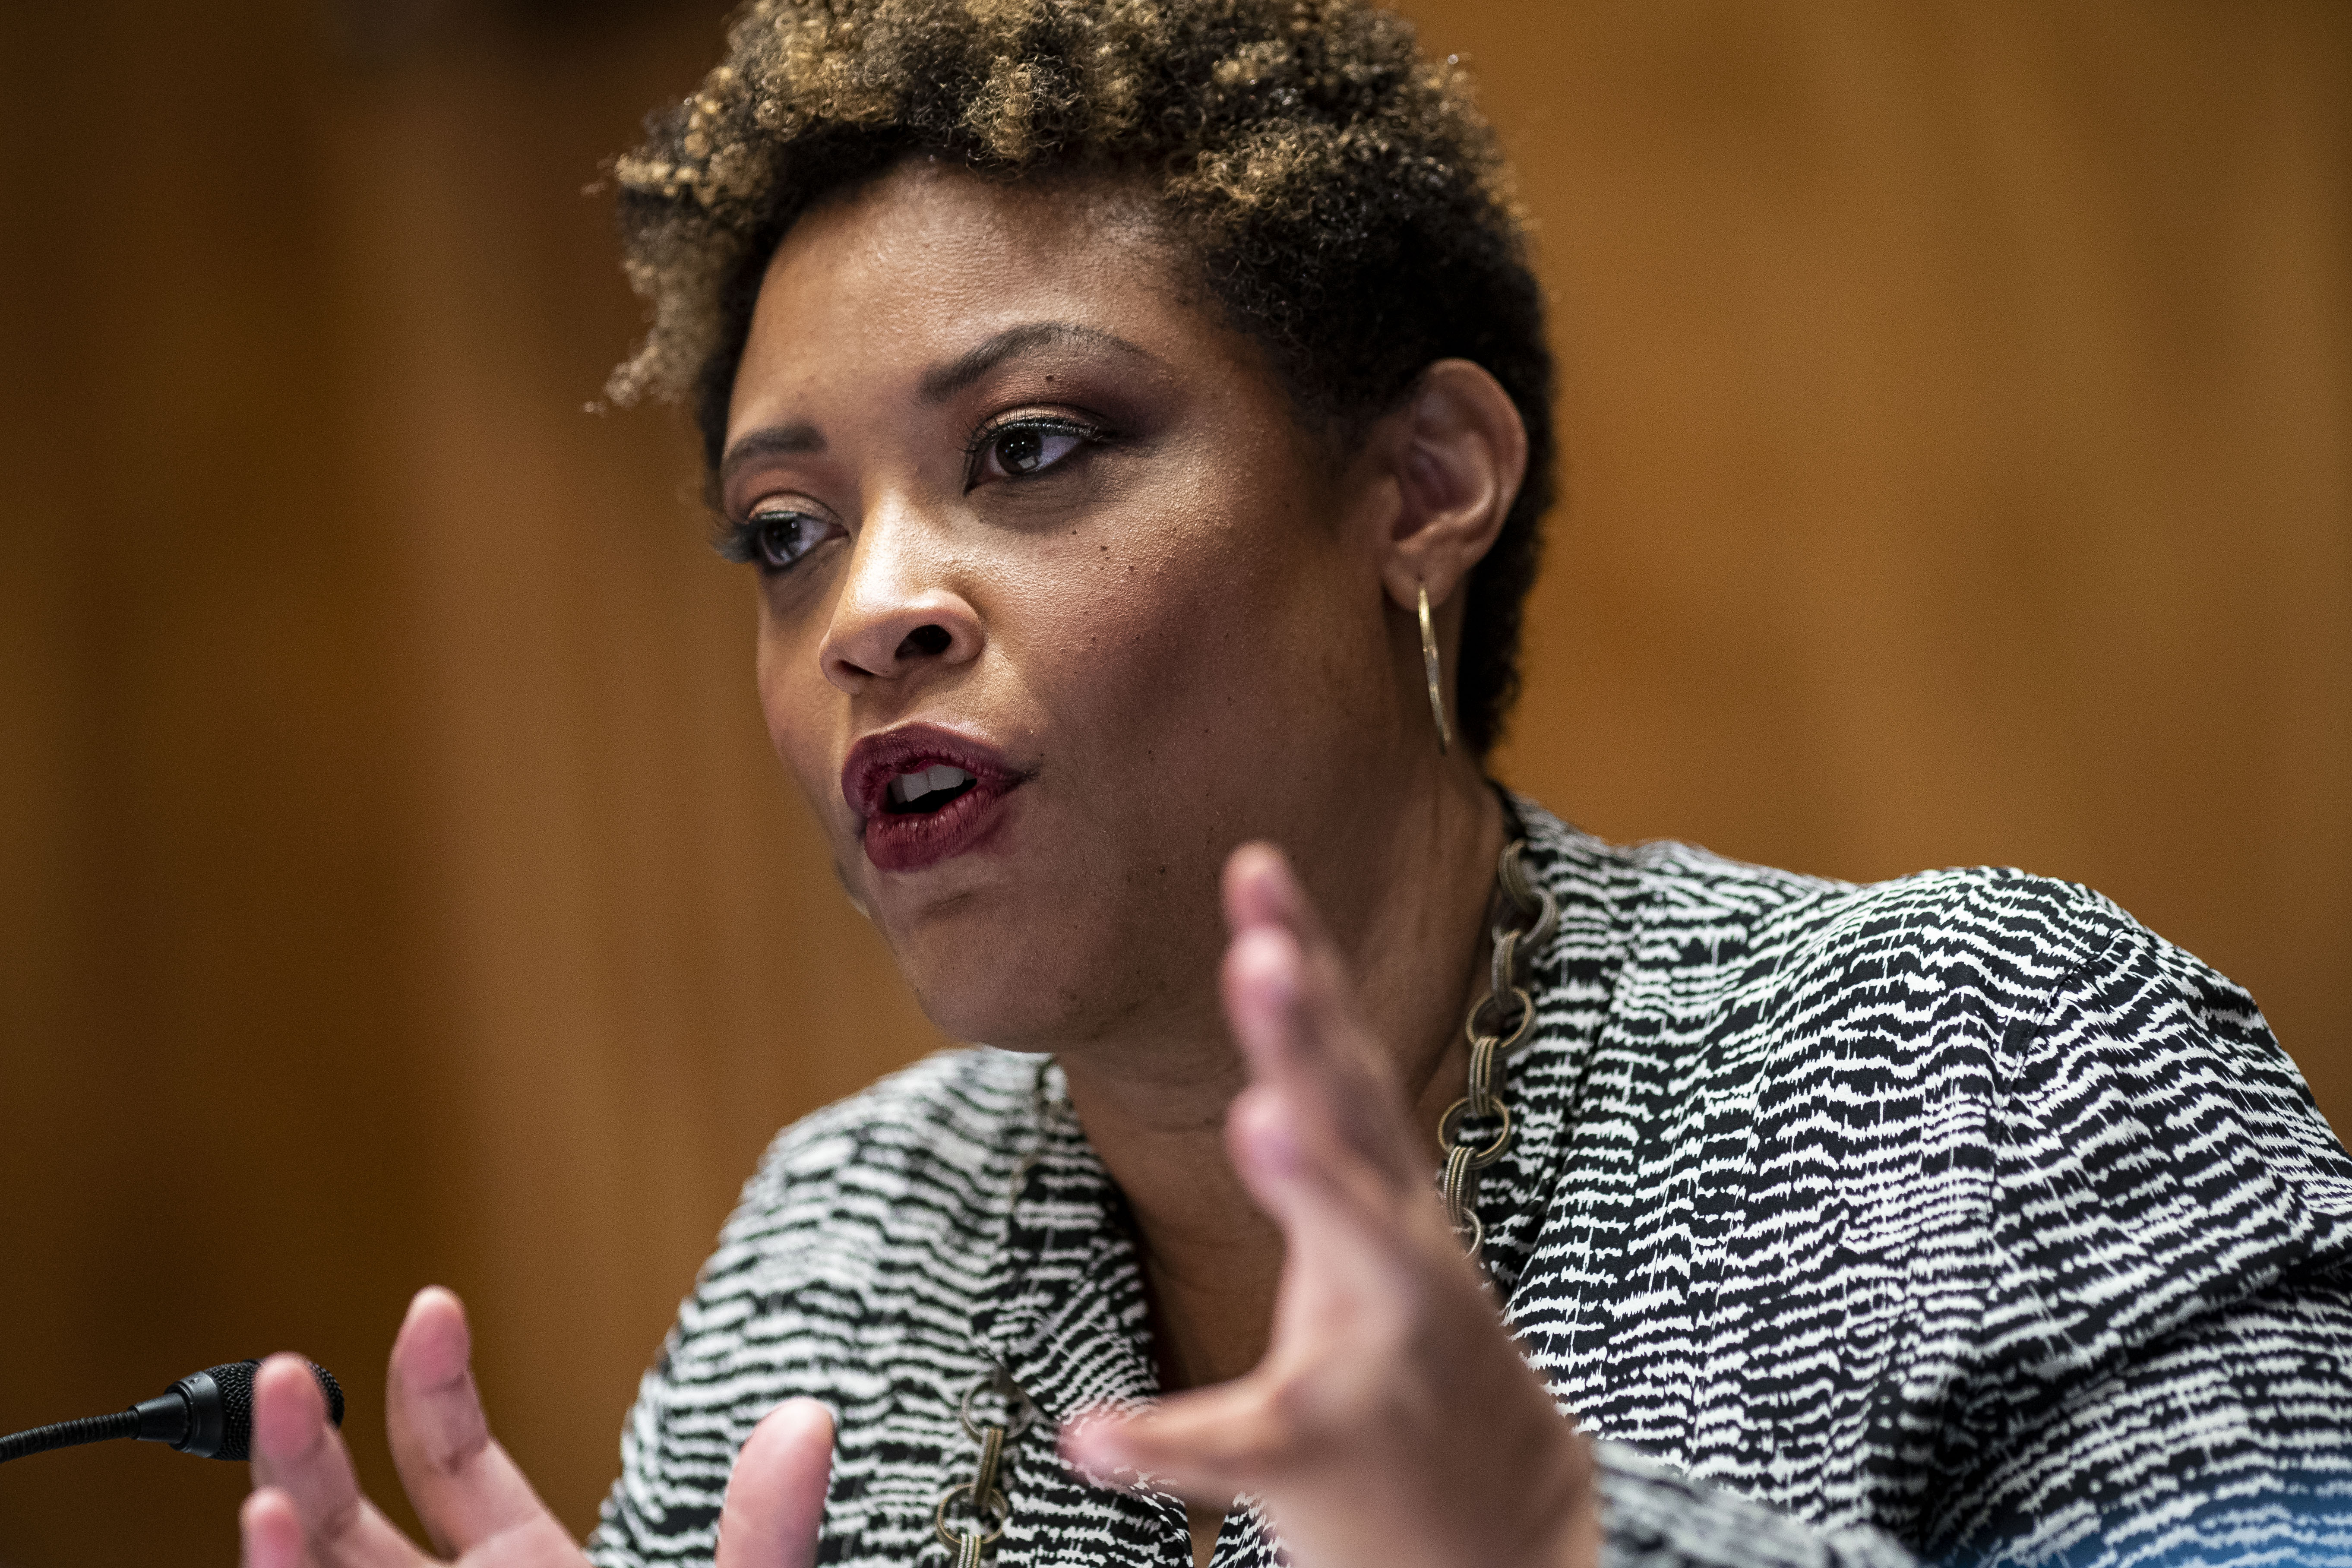 Shalanda Young, acting Office of Management and Budget director, speaks during a Senate Homeland Security and Governmental Affairs Committee confirmation hearing in Washington, D.C., on February 1.